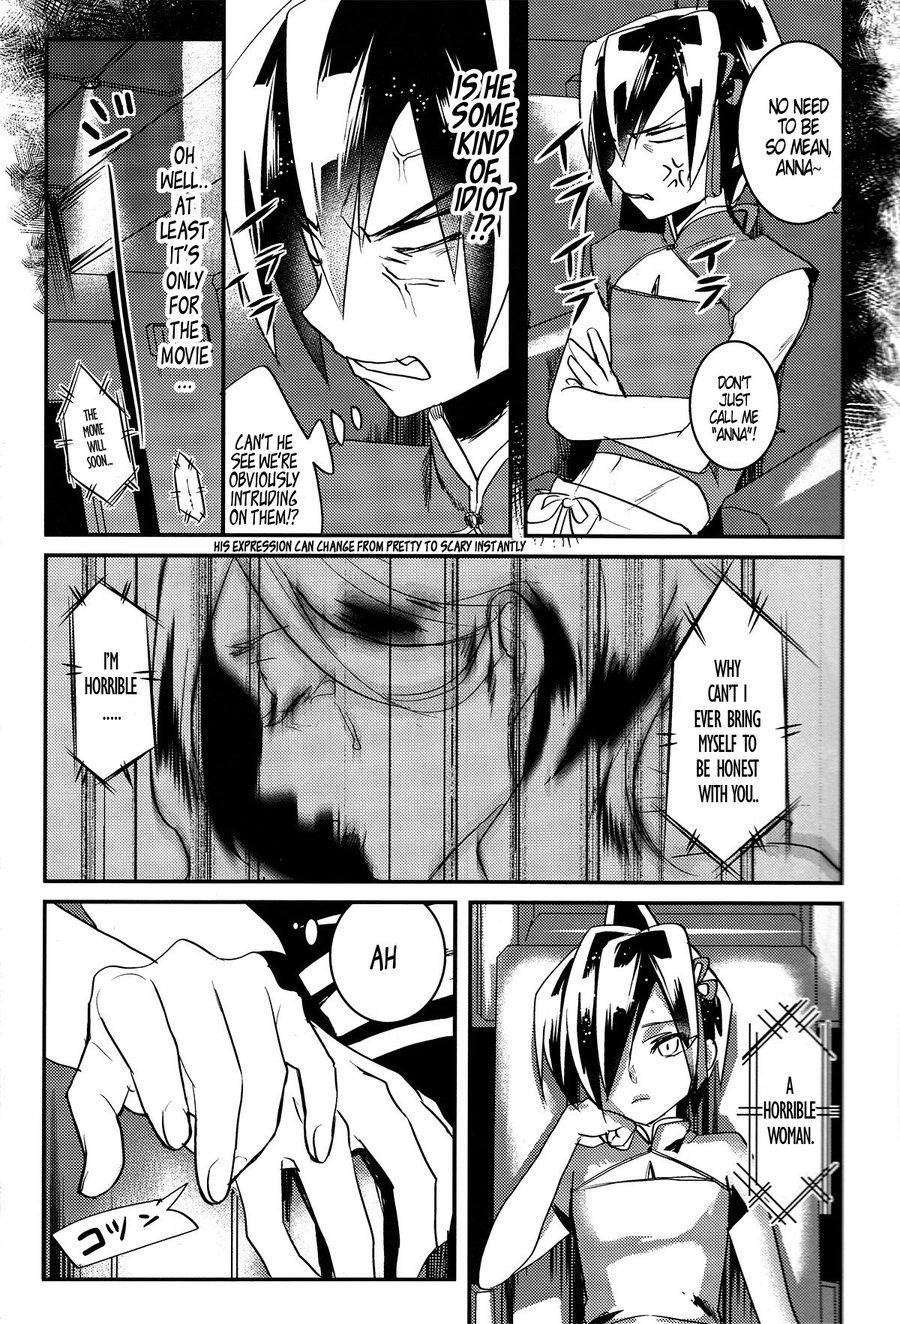 Reality Lie and Heart - Shaman king Hardcore Sex - Page 9